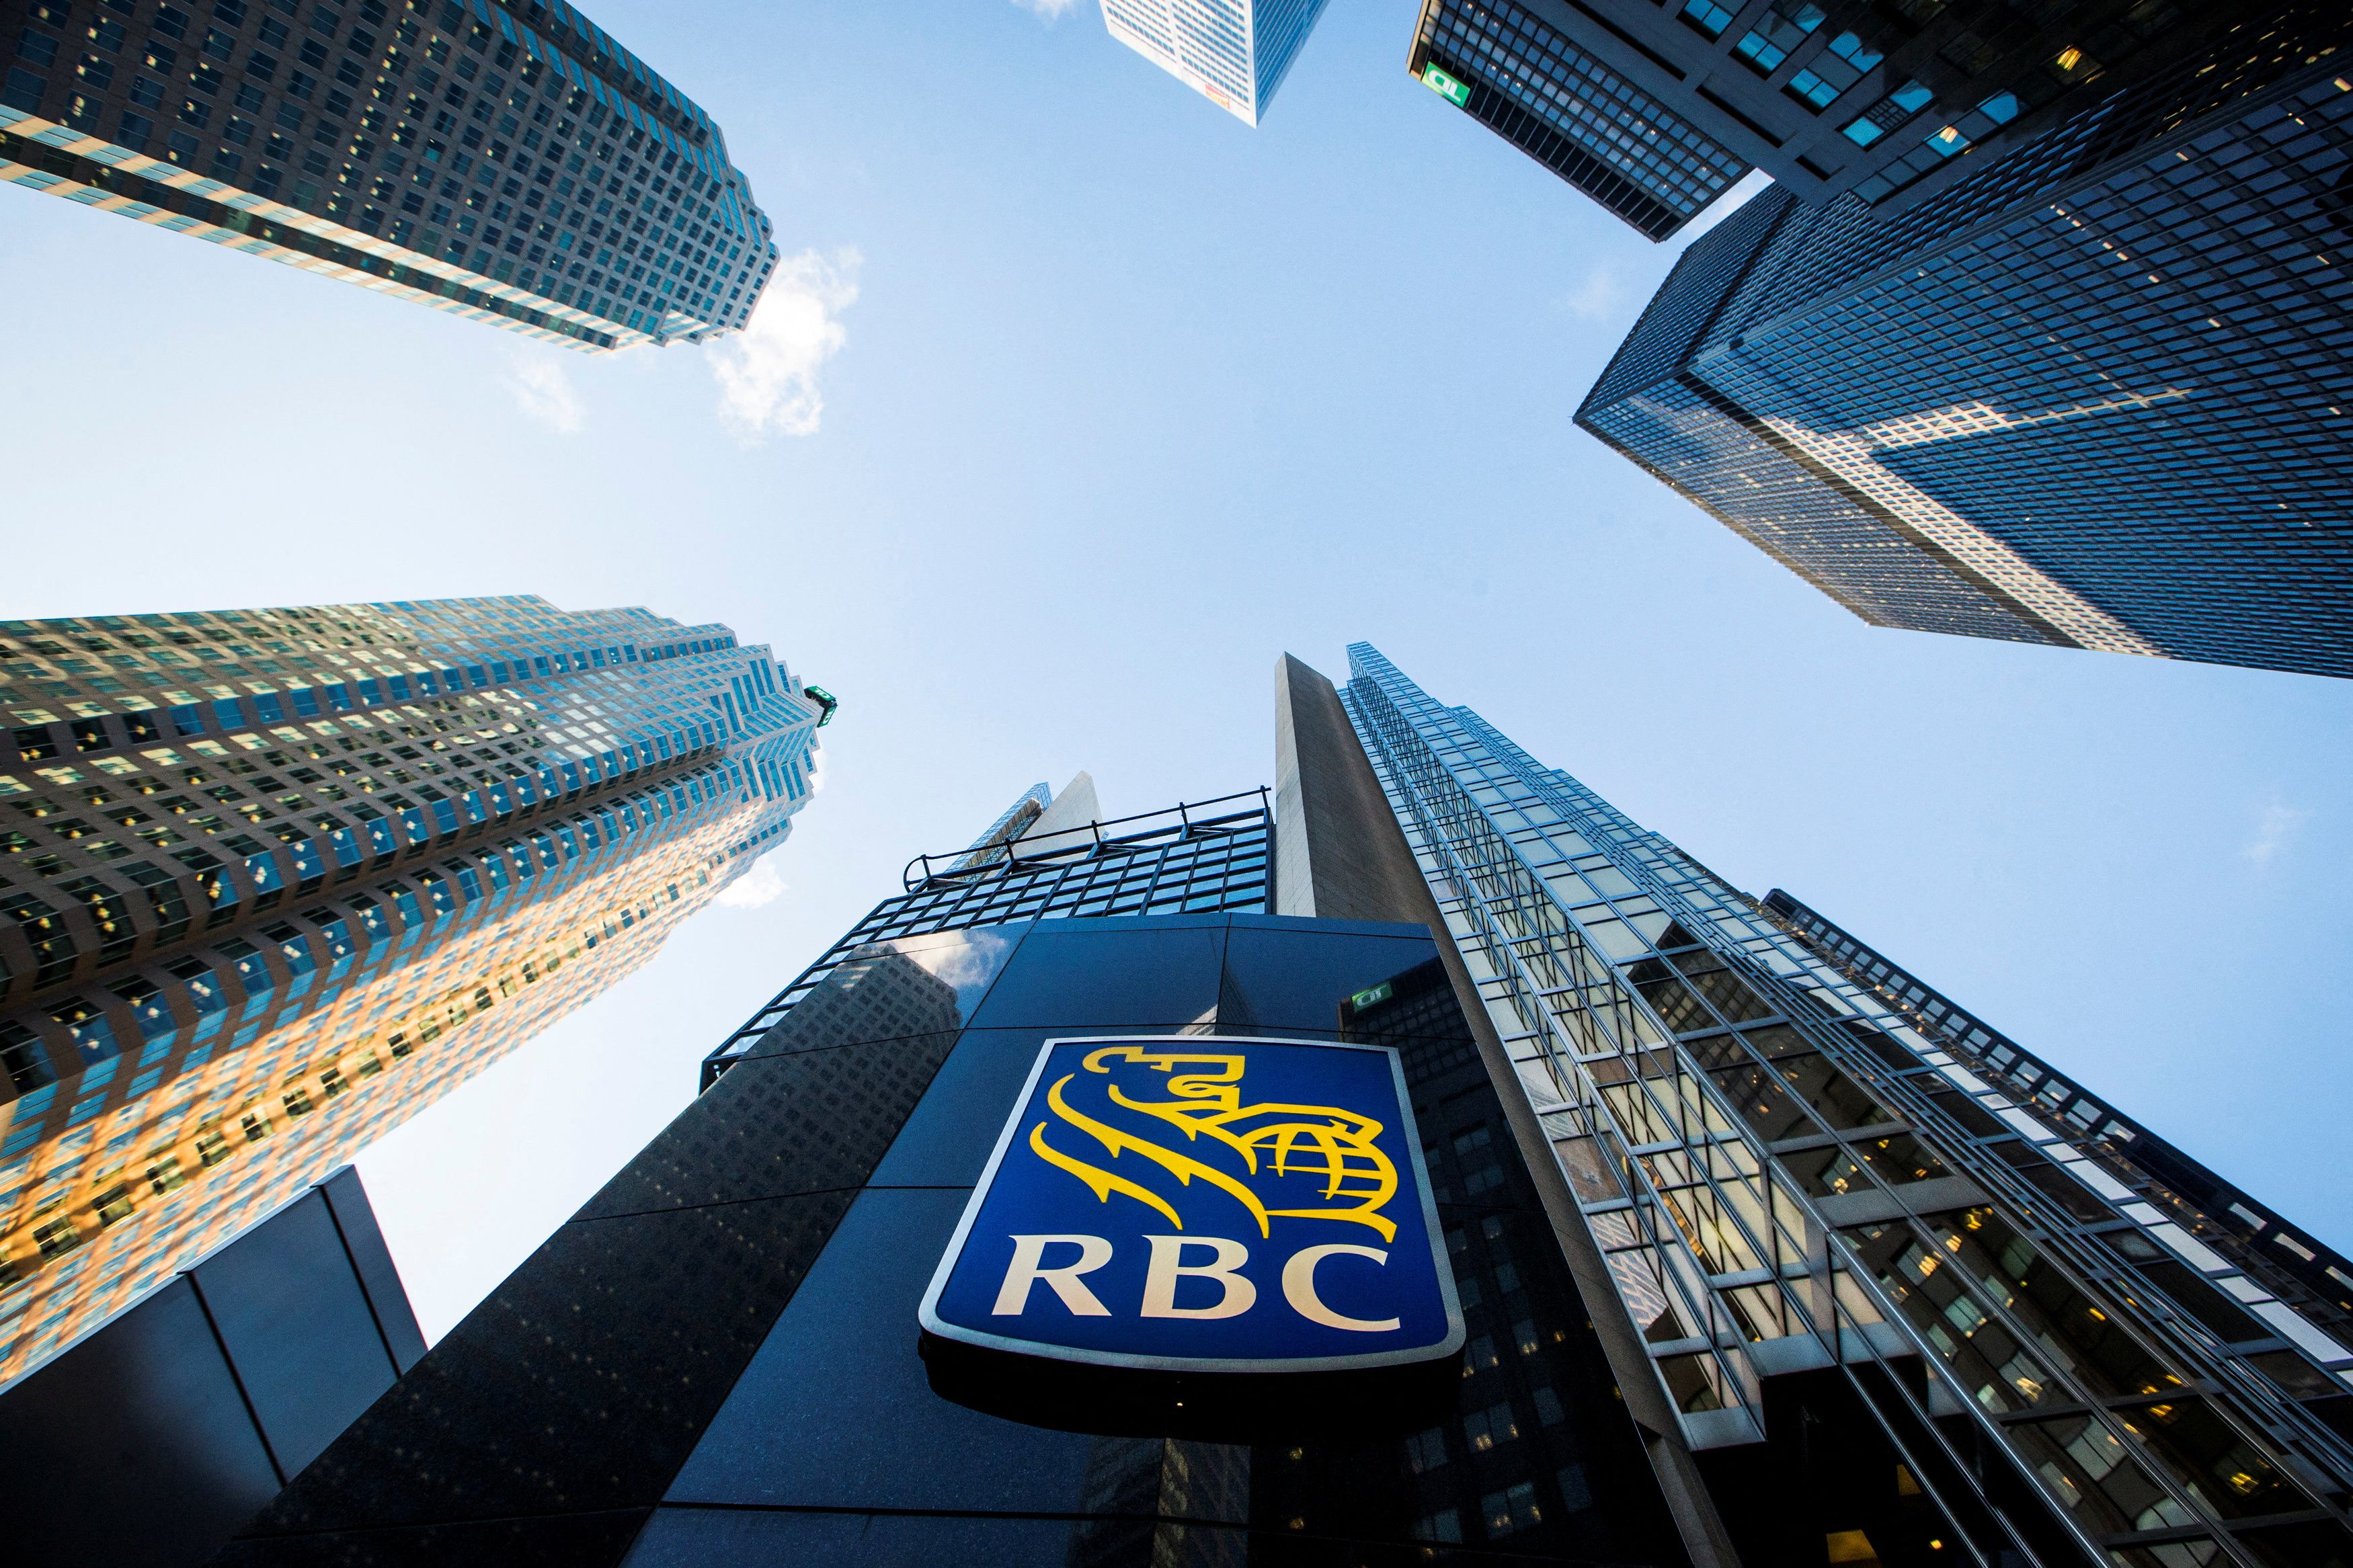 A Royal Bank of Canada logo is seen on Bay Street in the heart of the financial district in Toronto